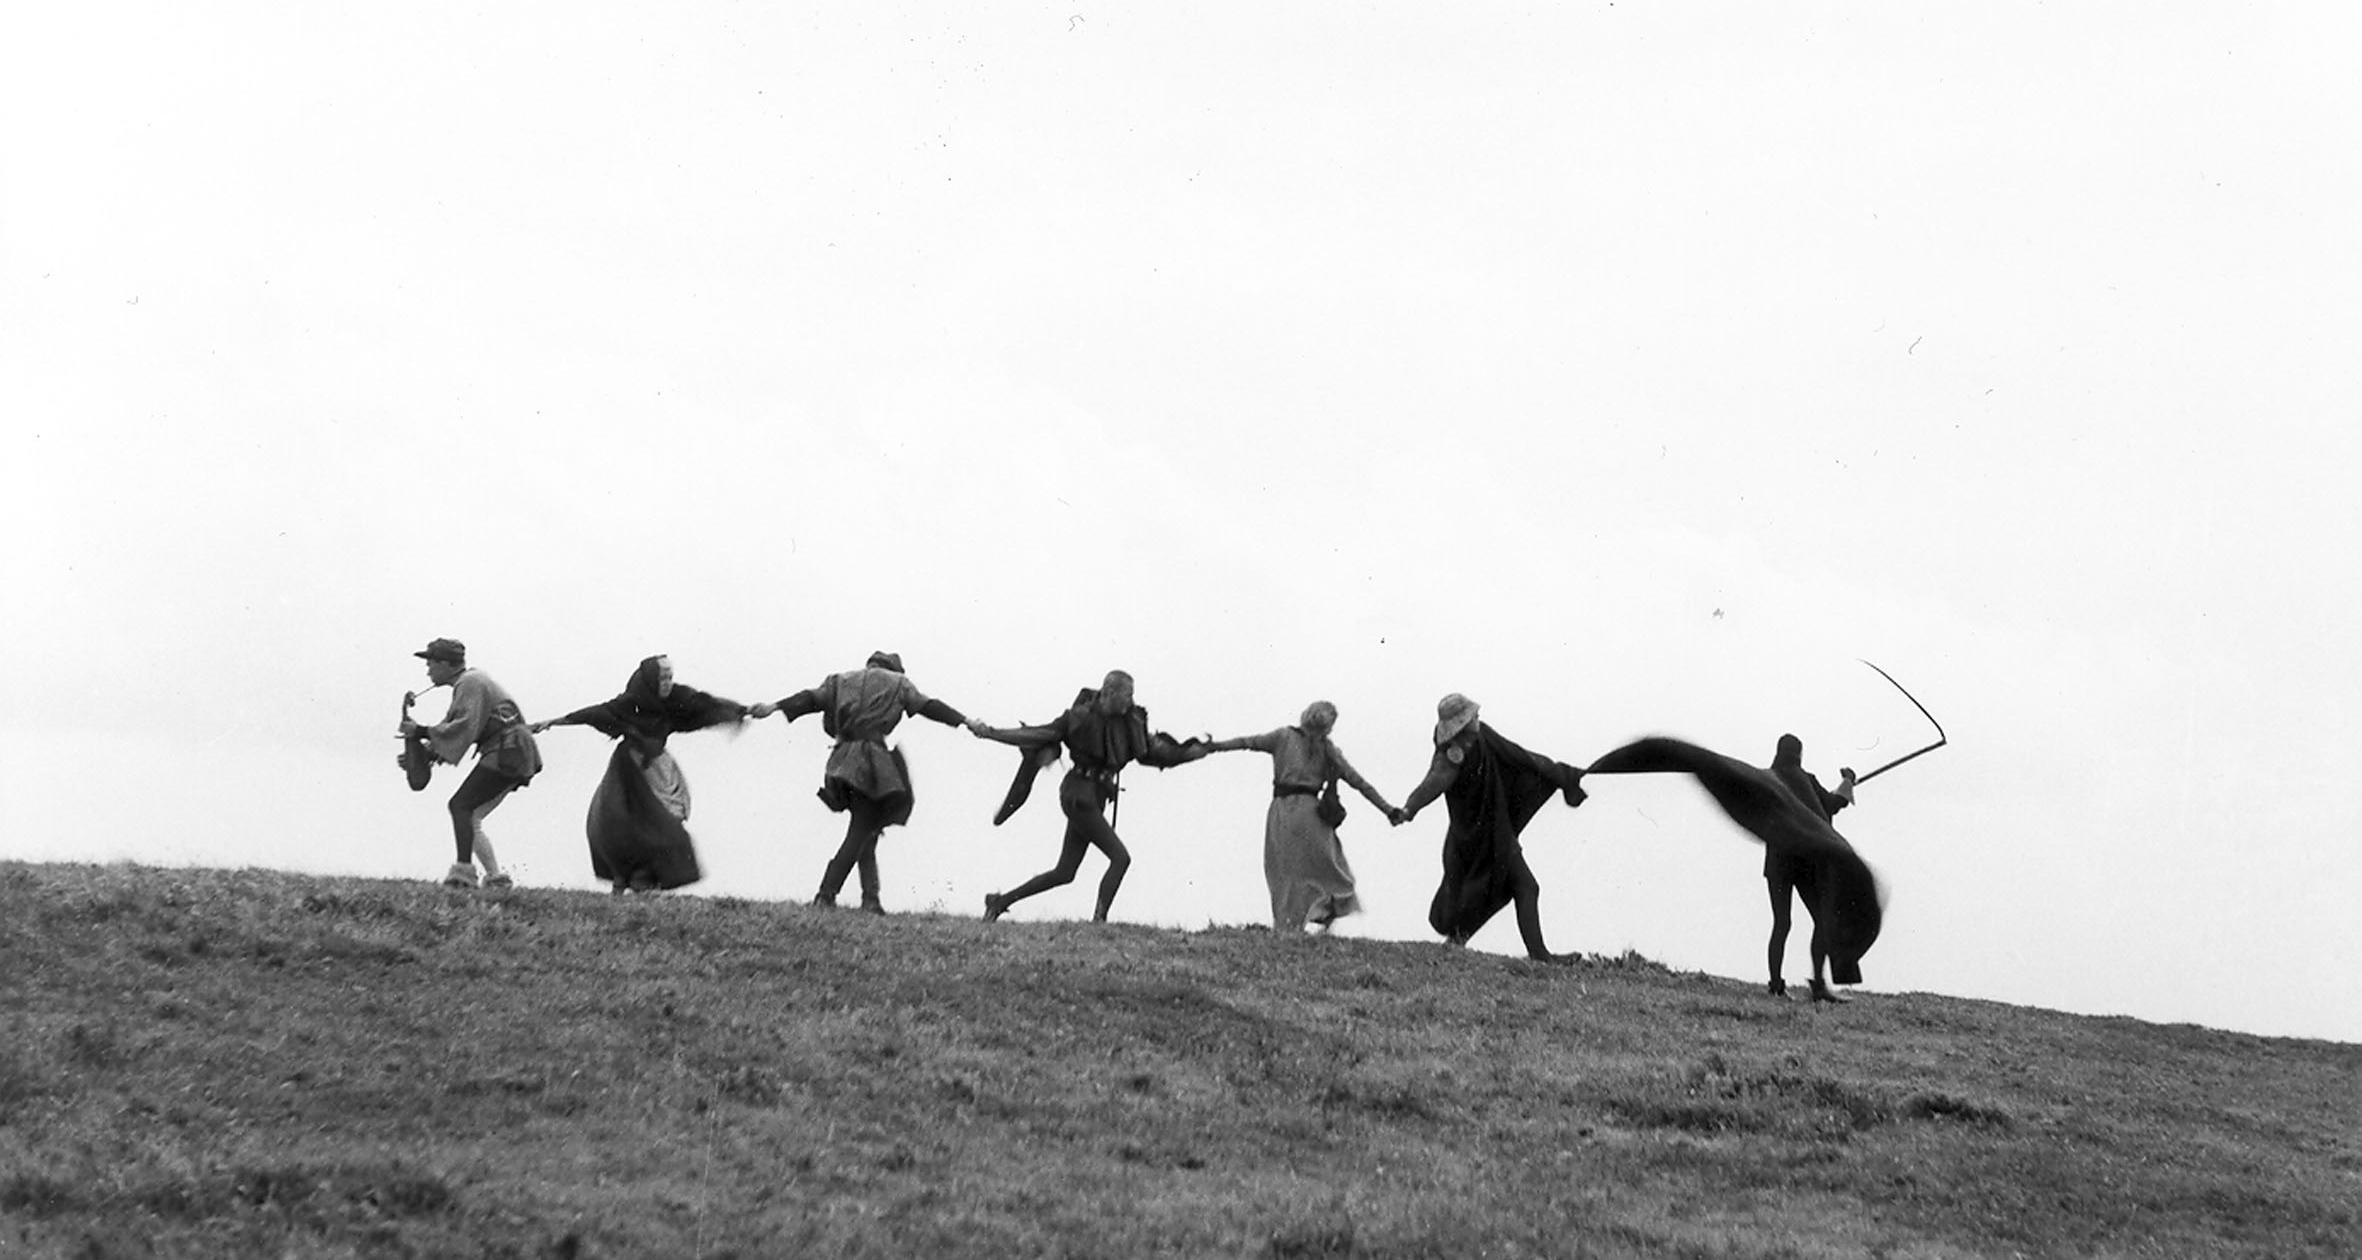 What's the most iconic still image from a Criterion film? For me nothing beats this shot from the ending of The Seventh Seal